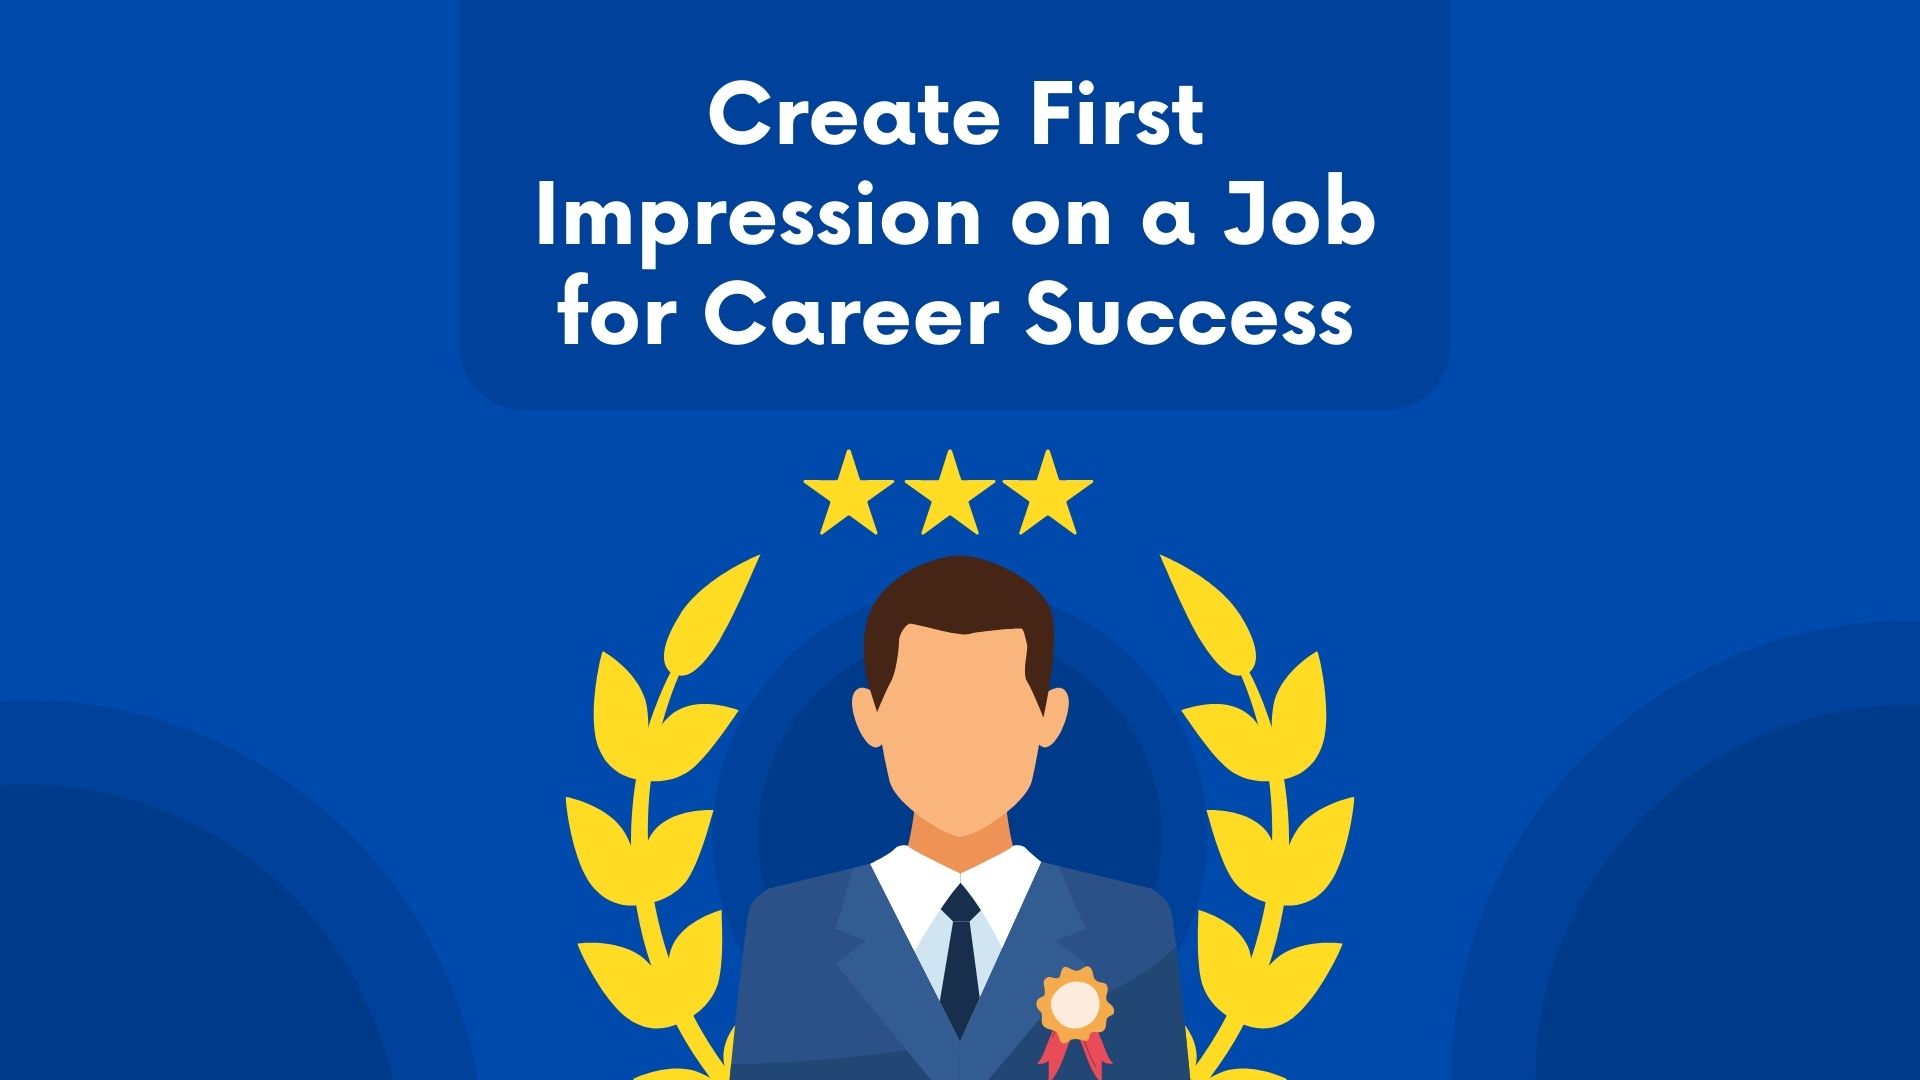 Create First Impression on a Job for Career Success Image